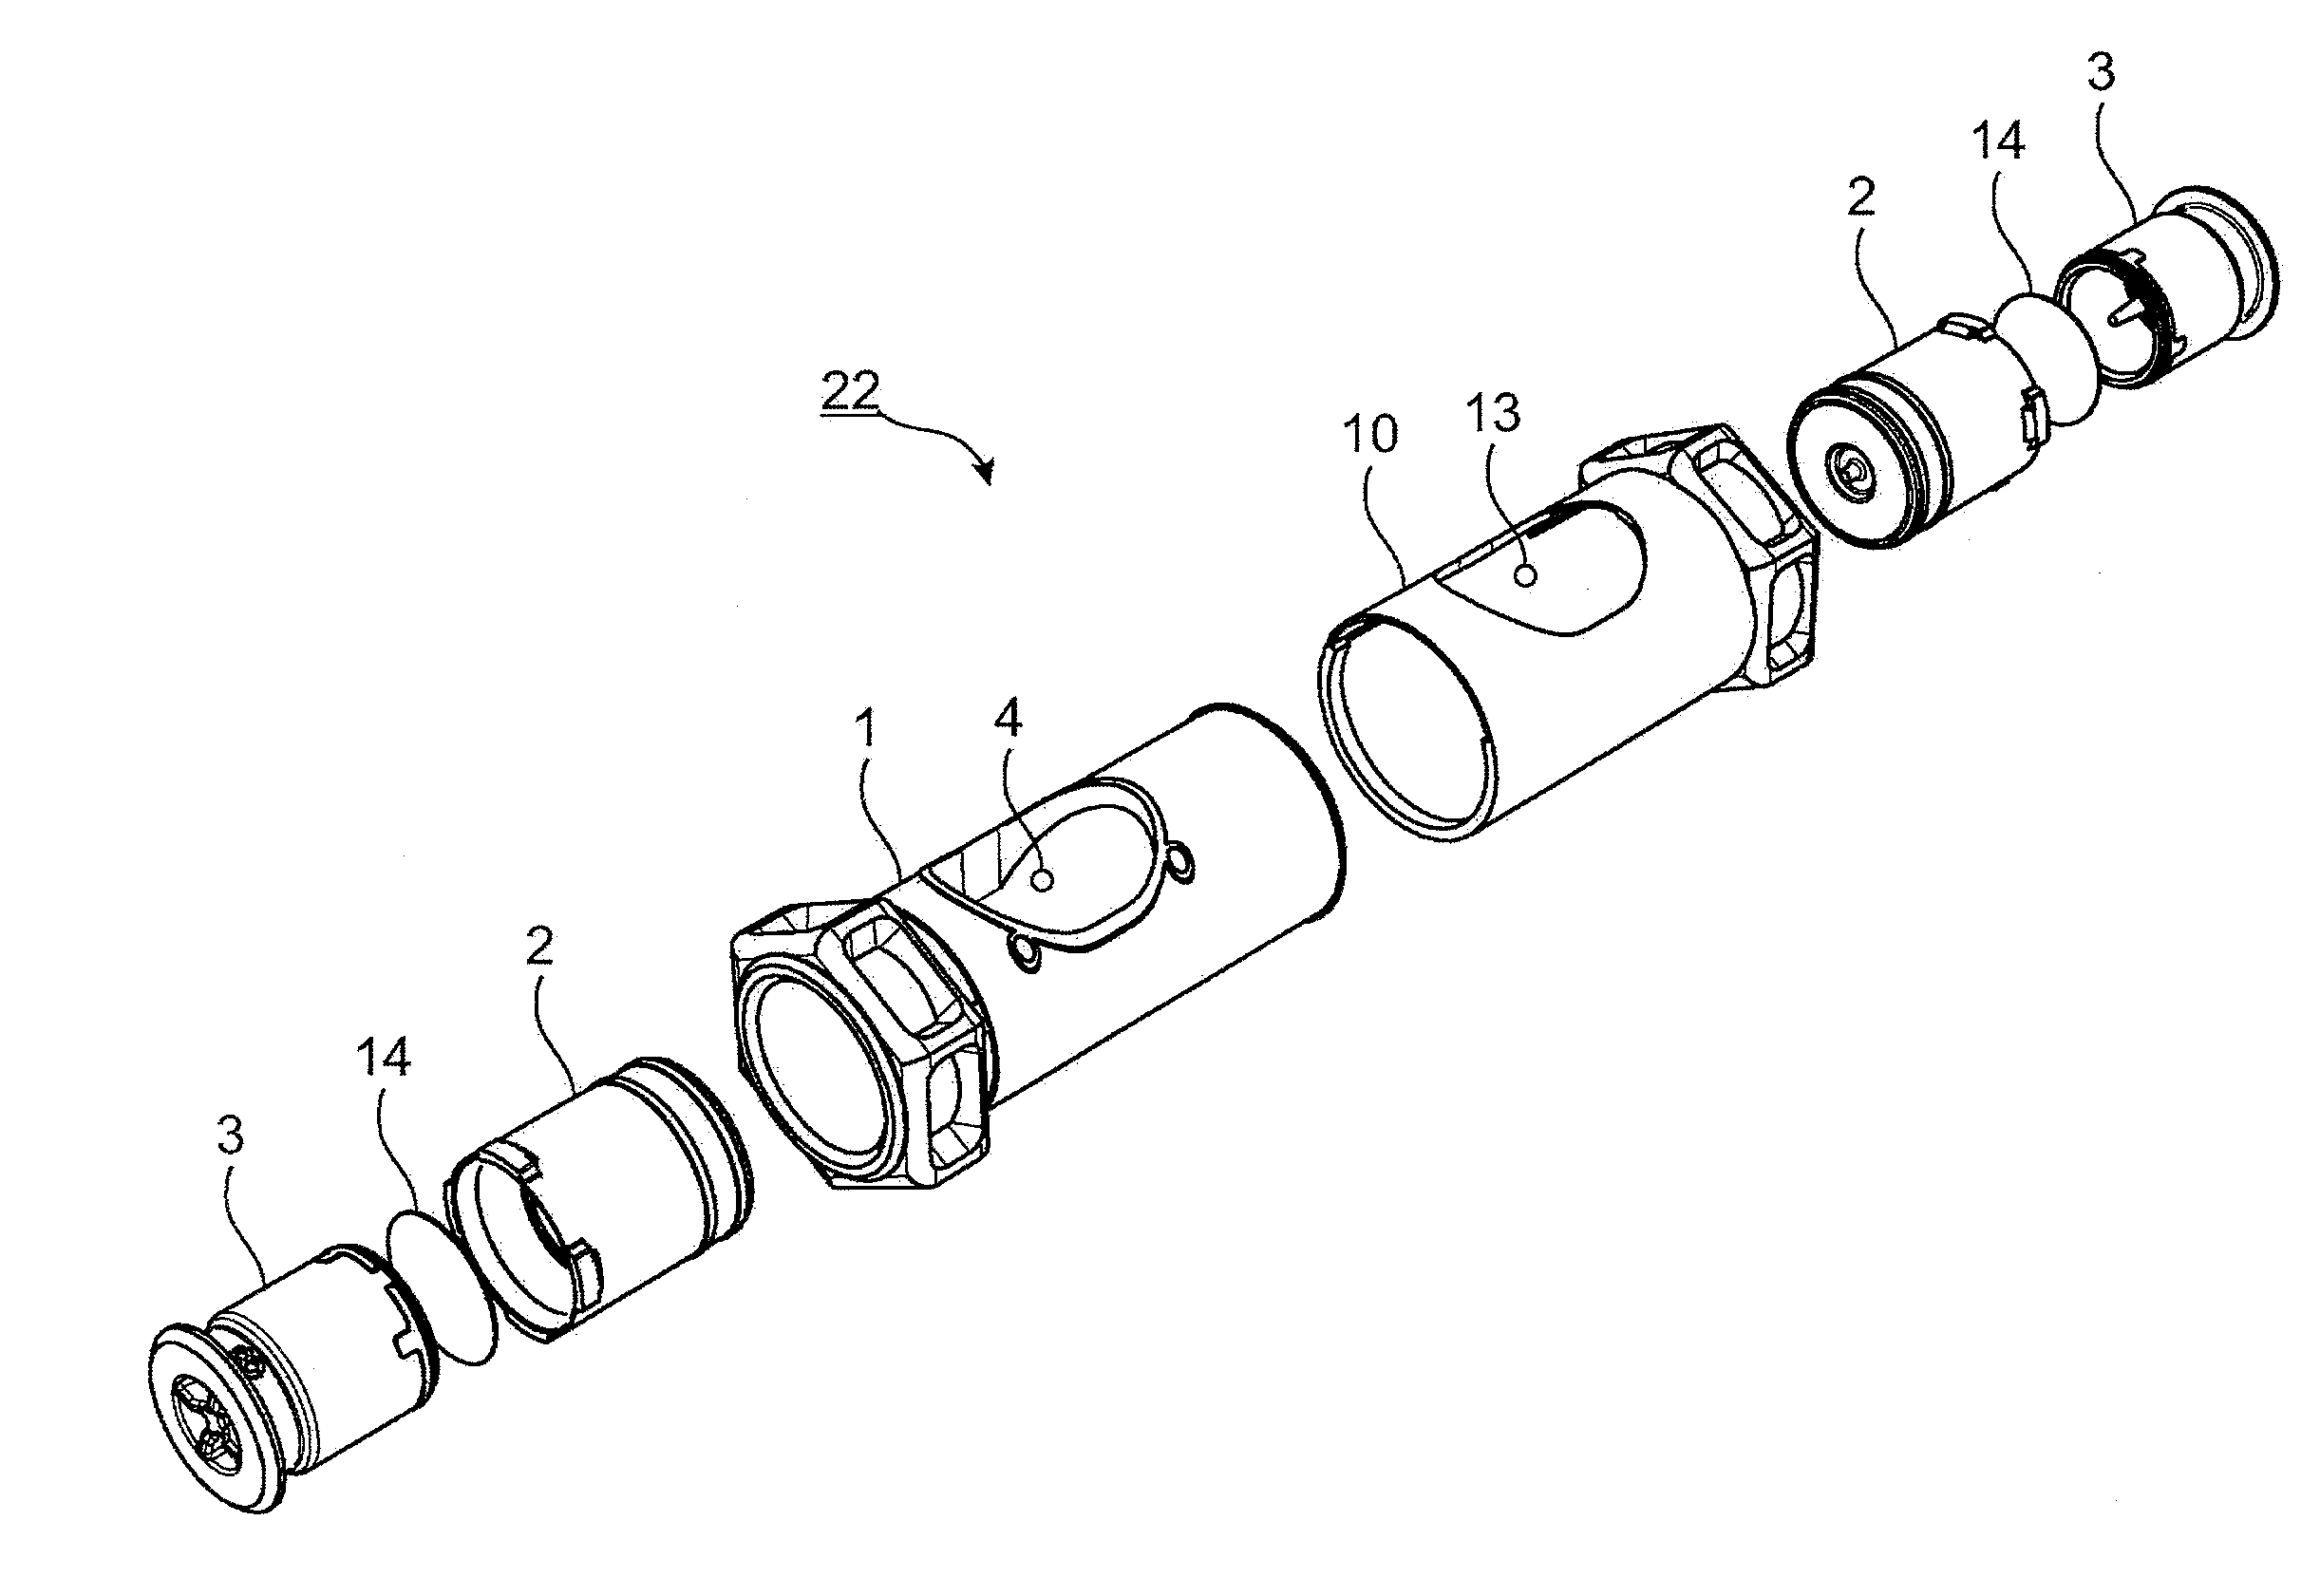 Mixing capsule for producing a dental preparation